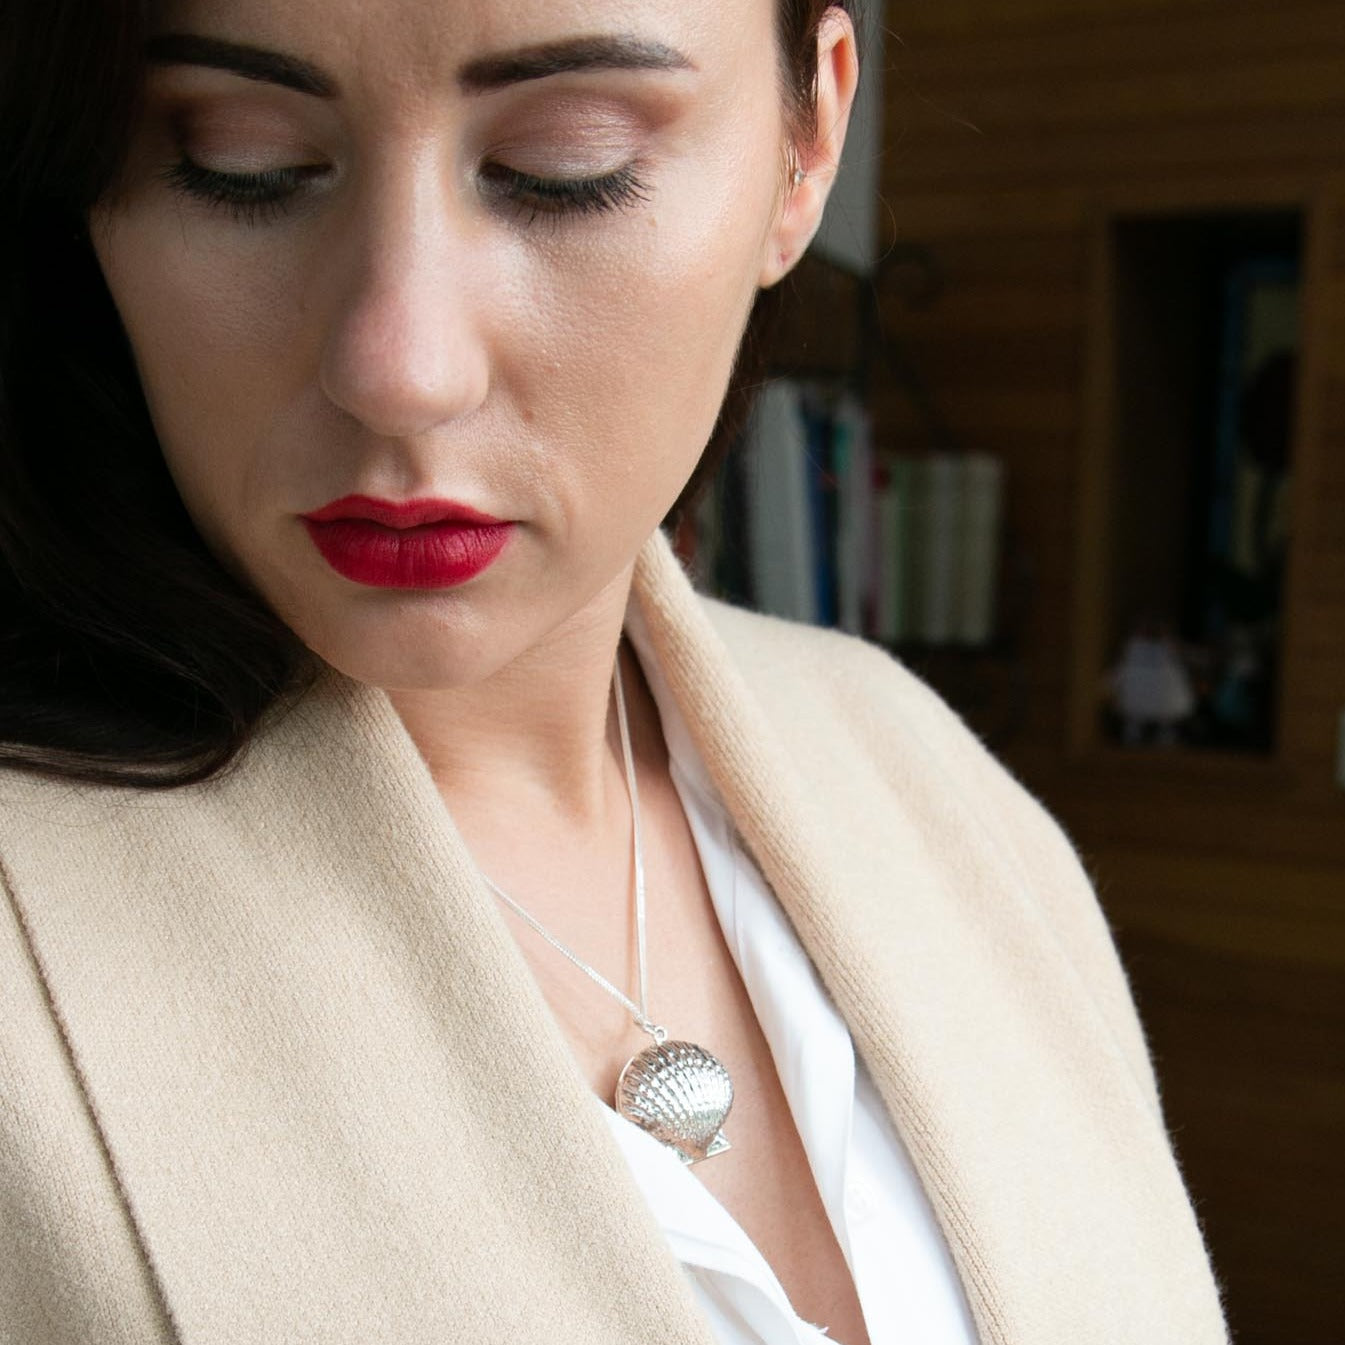 Model with red lips, wearing beige coat and white shirt and sterling silver clam shell-shaped photo locket pendant. Model is looking downwards.